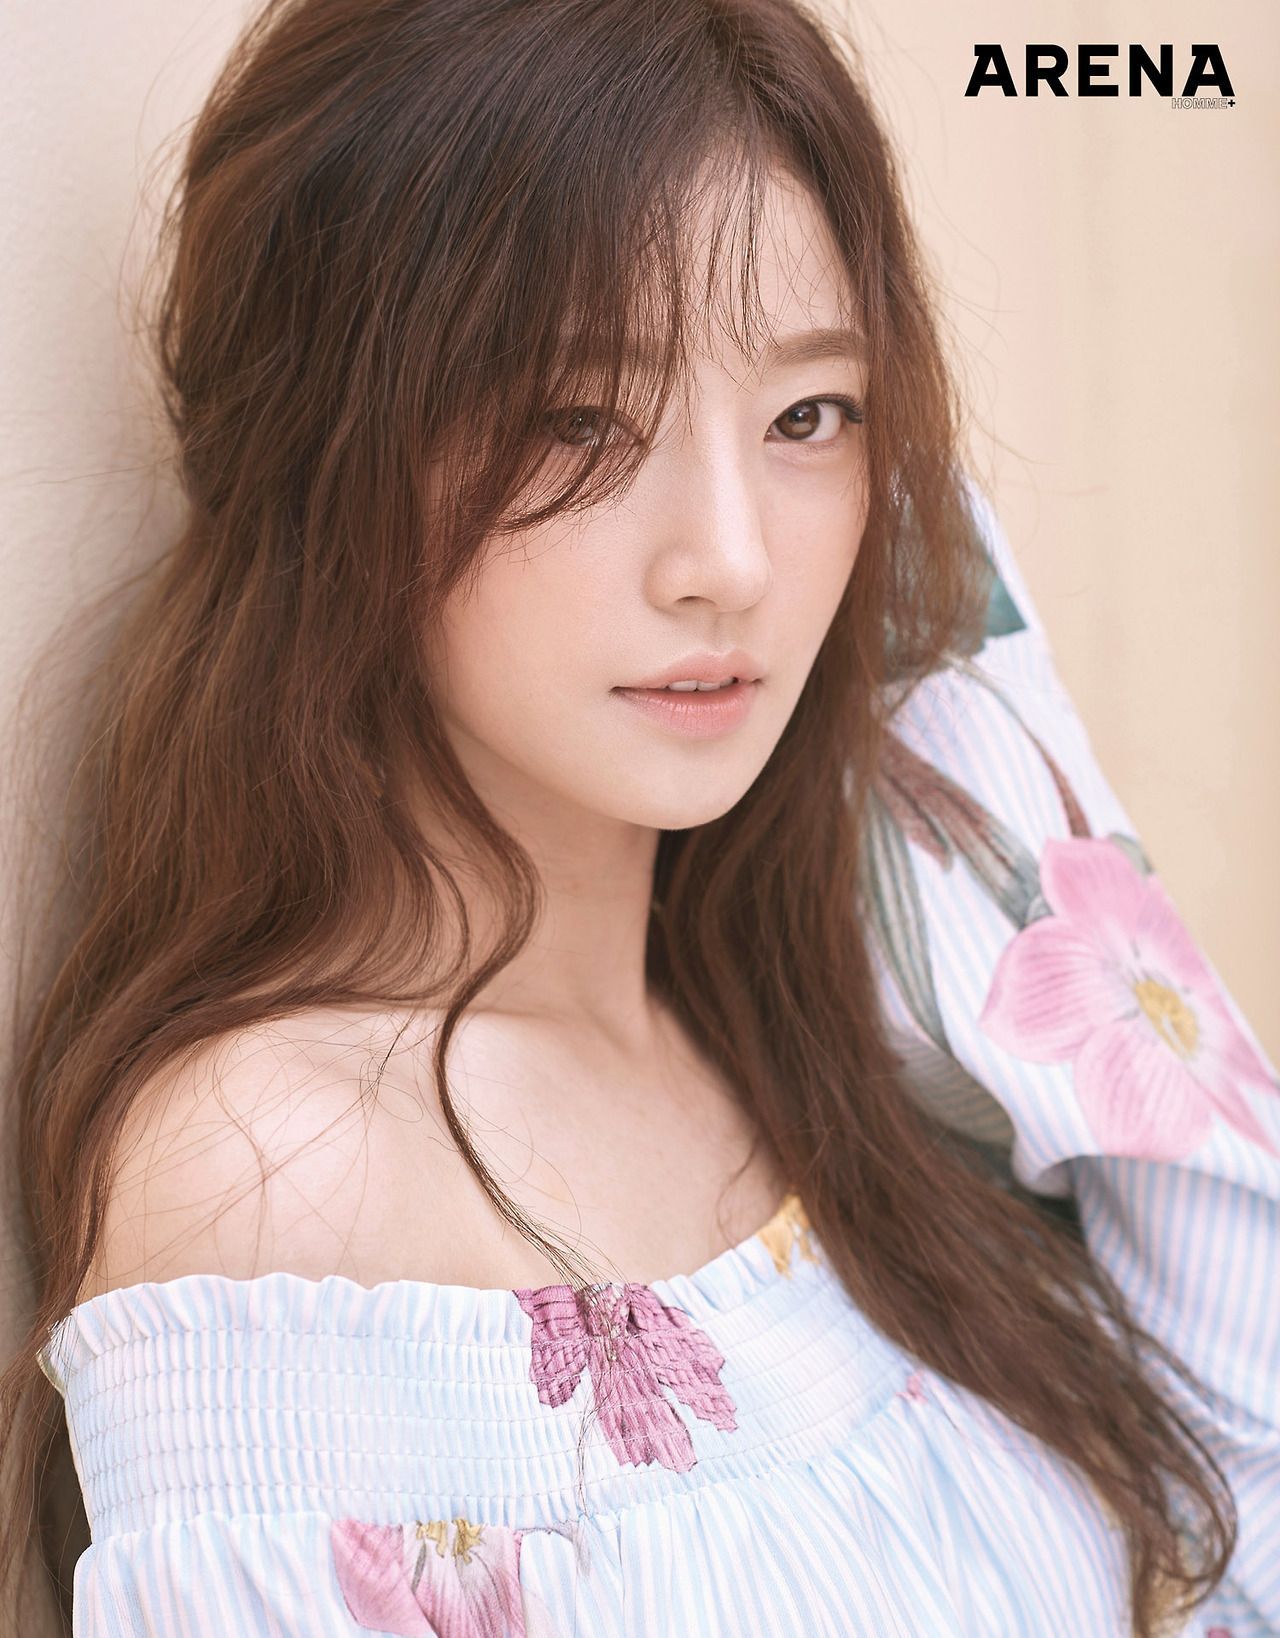 Song Ha Yoon Homme Plus Magazine August. photohoots. Korean actresses, Actresses, Actors & actresses